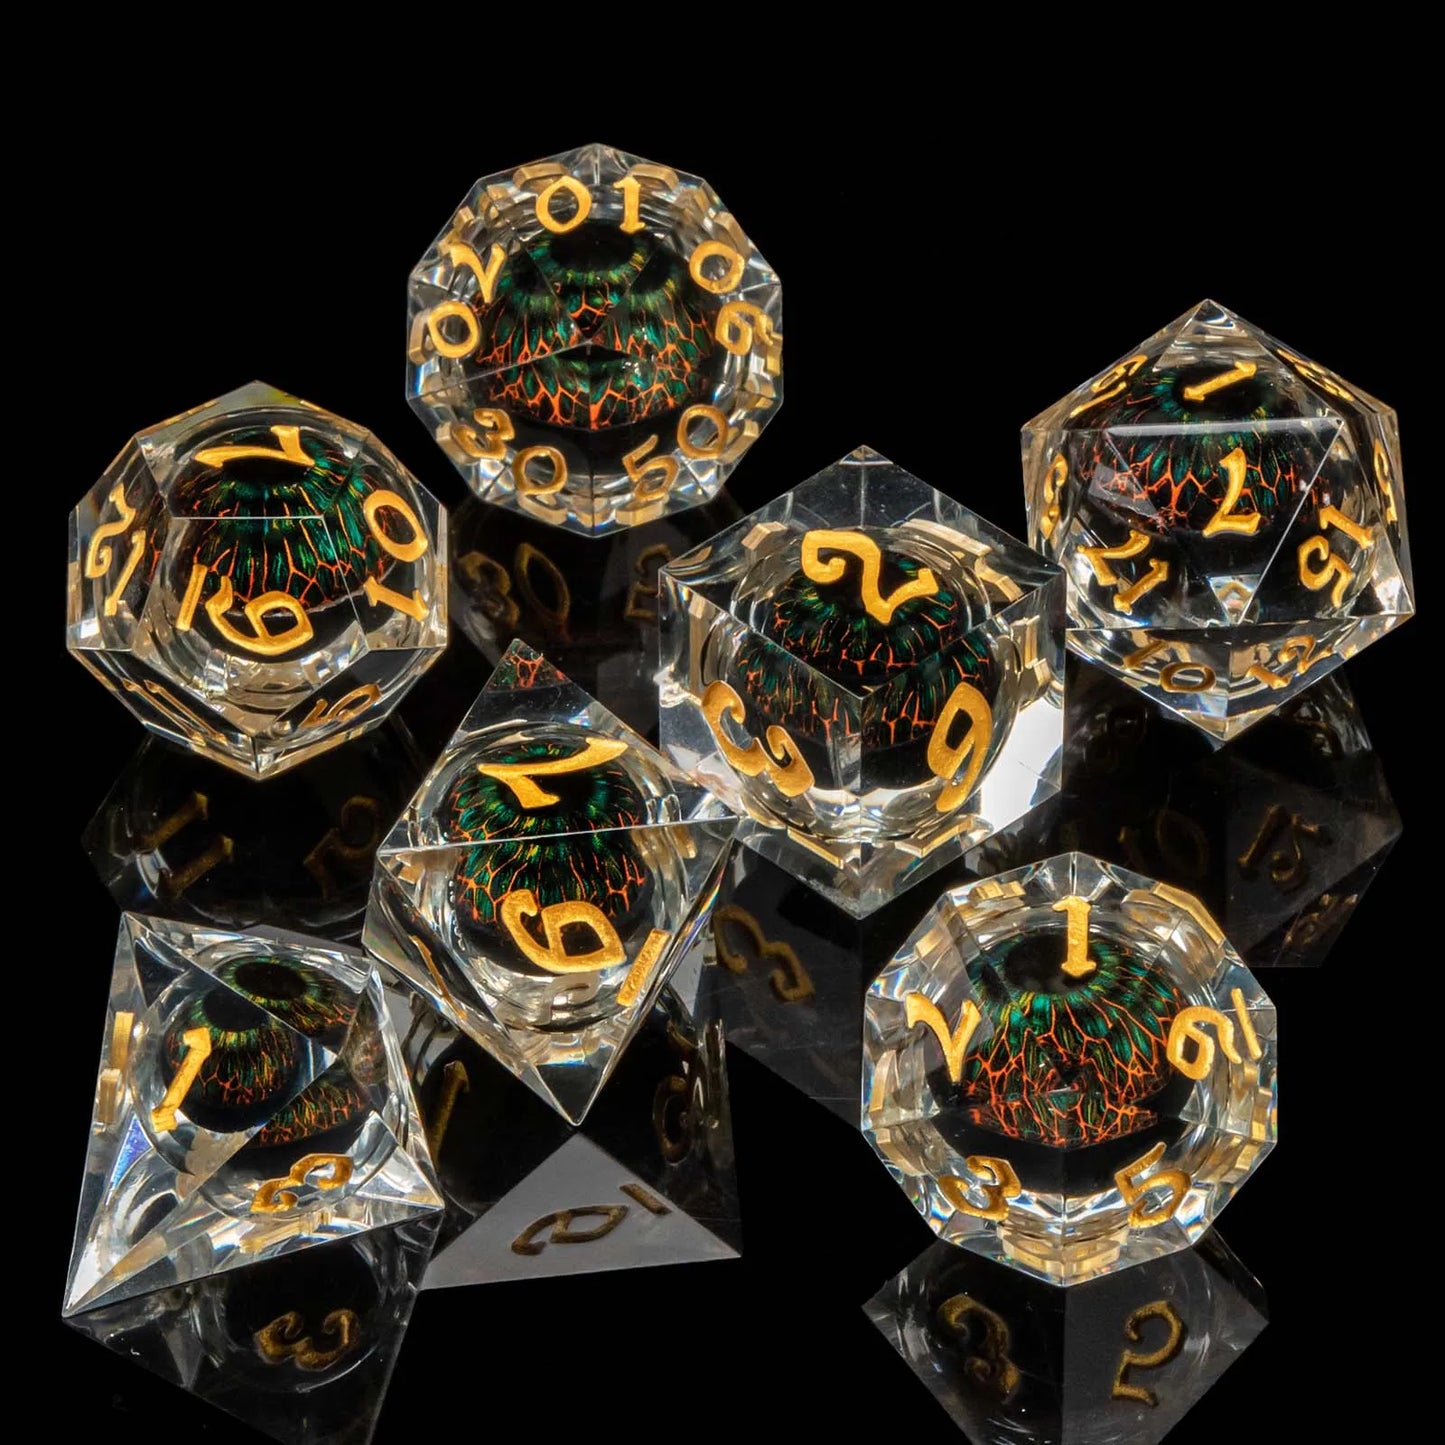 D and D Flowing Sand Sharp Edge Dragon Eye Dnd Resin RPG Polyhedral D&D Dice Set For Dungeon and Dragon Pathfinder Role Playing AZ10